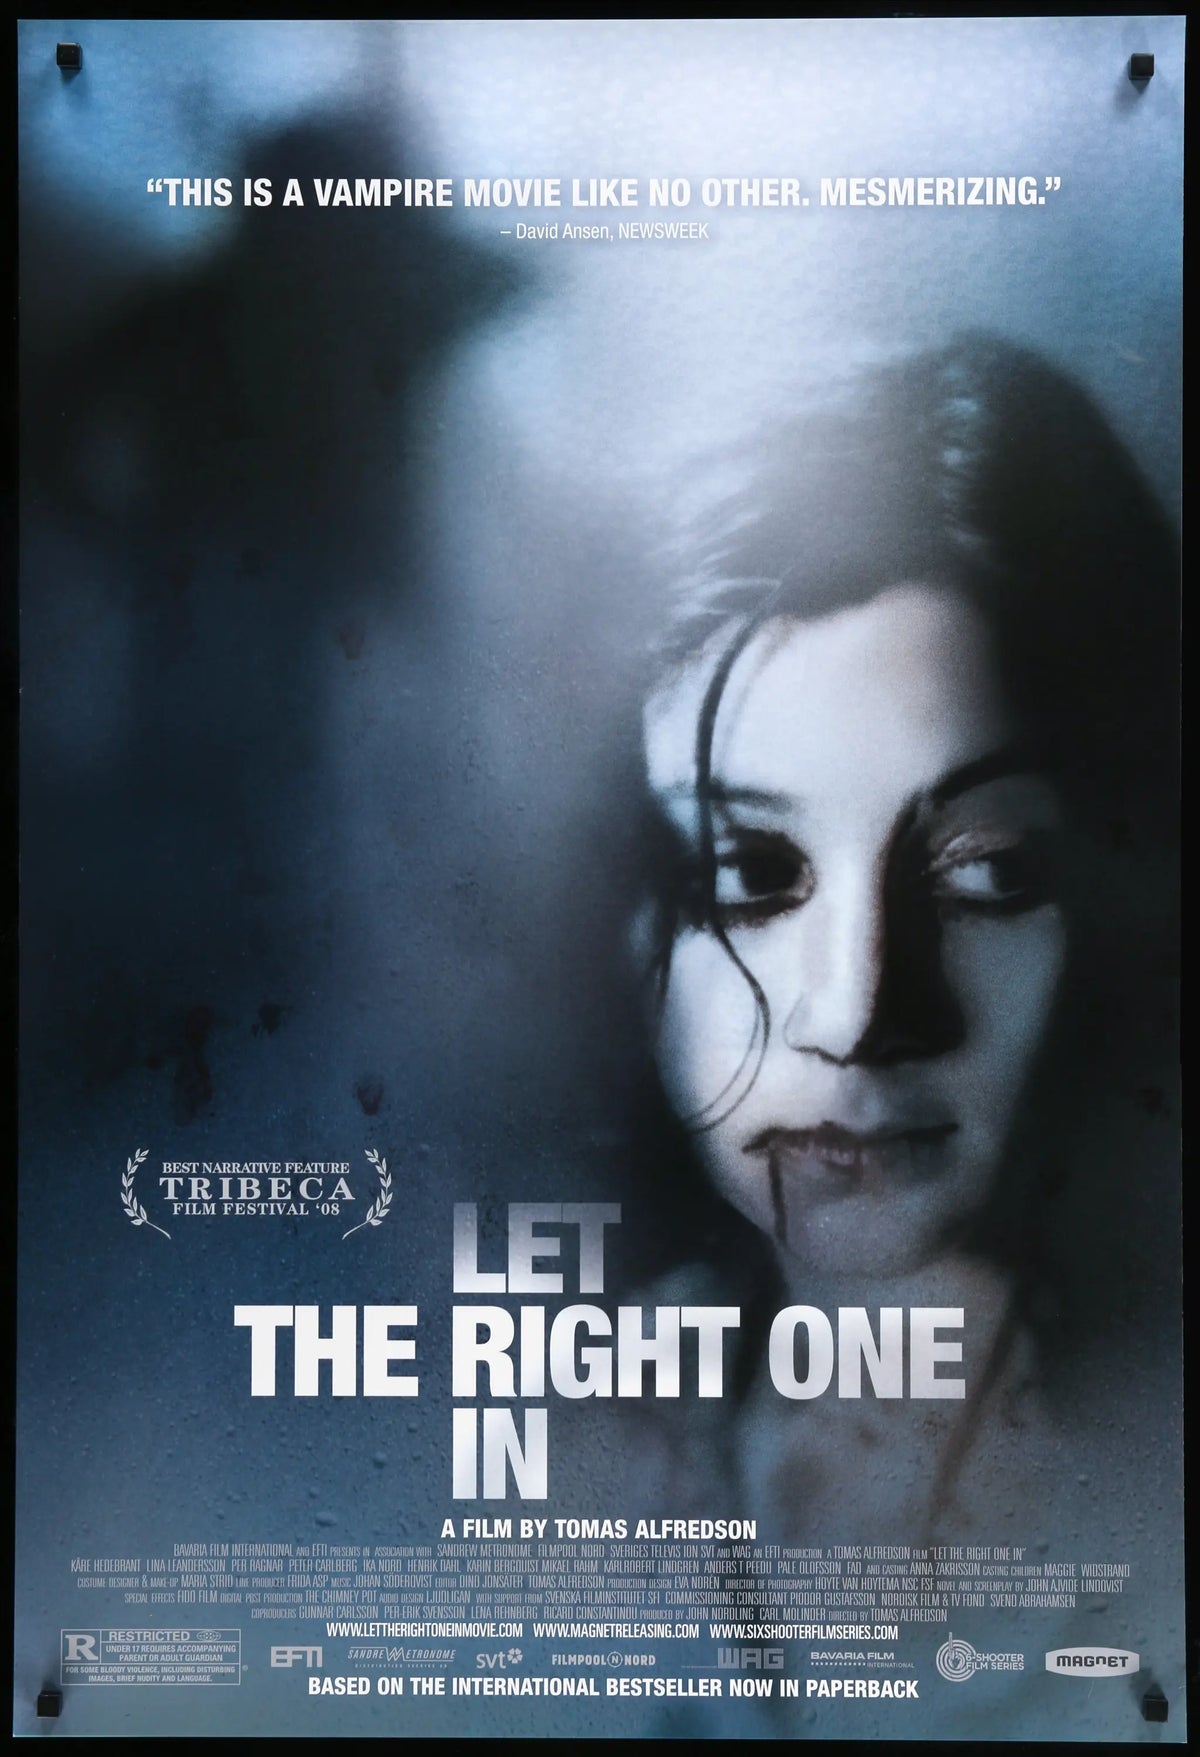 Let the Right One In (2008) original movie poster for sale at Original Film Art